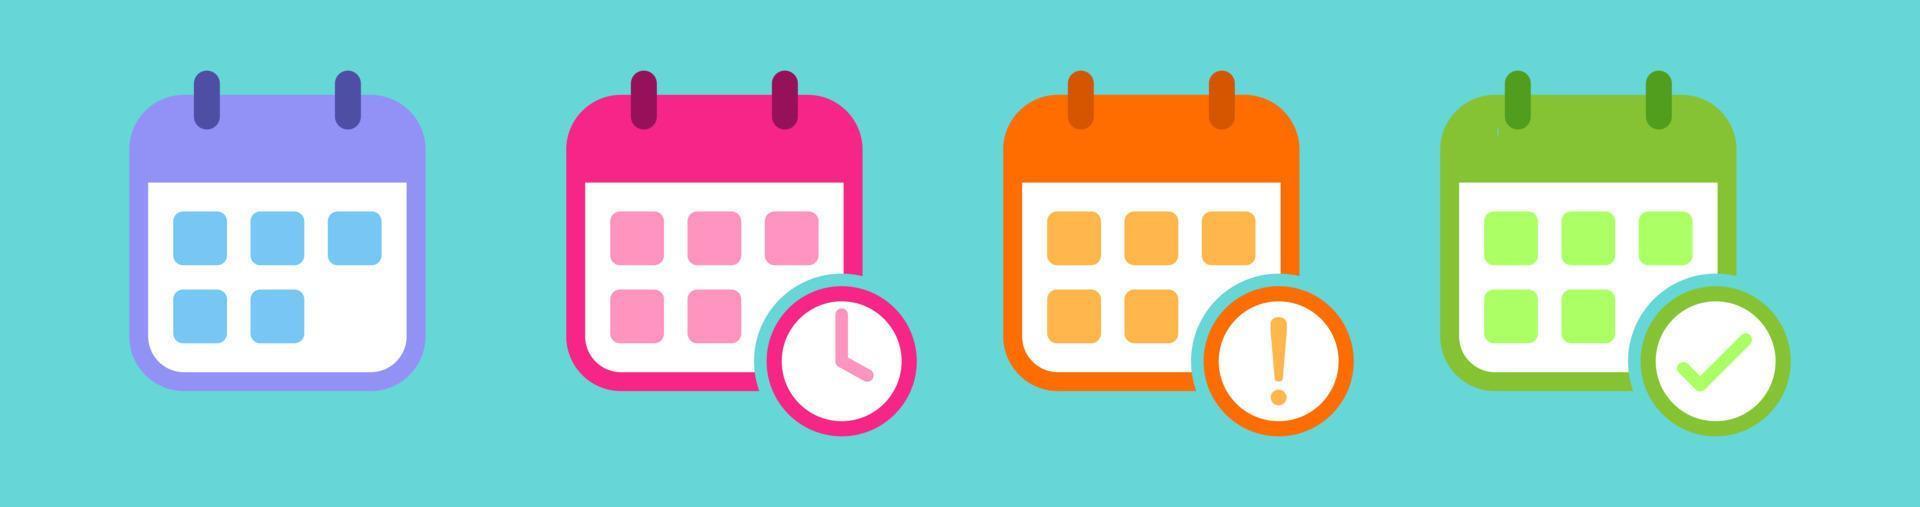 Calendar icon set vector illustration. Colorful icon in flat design style.